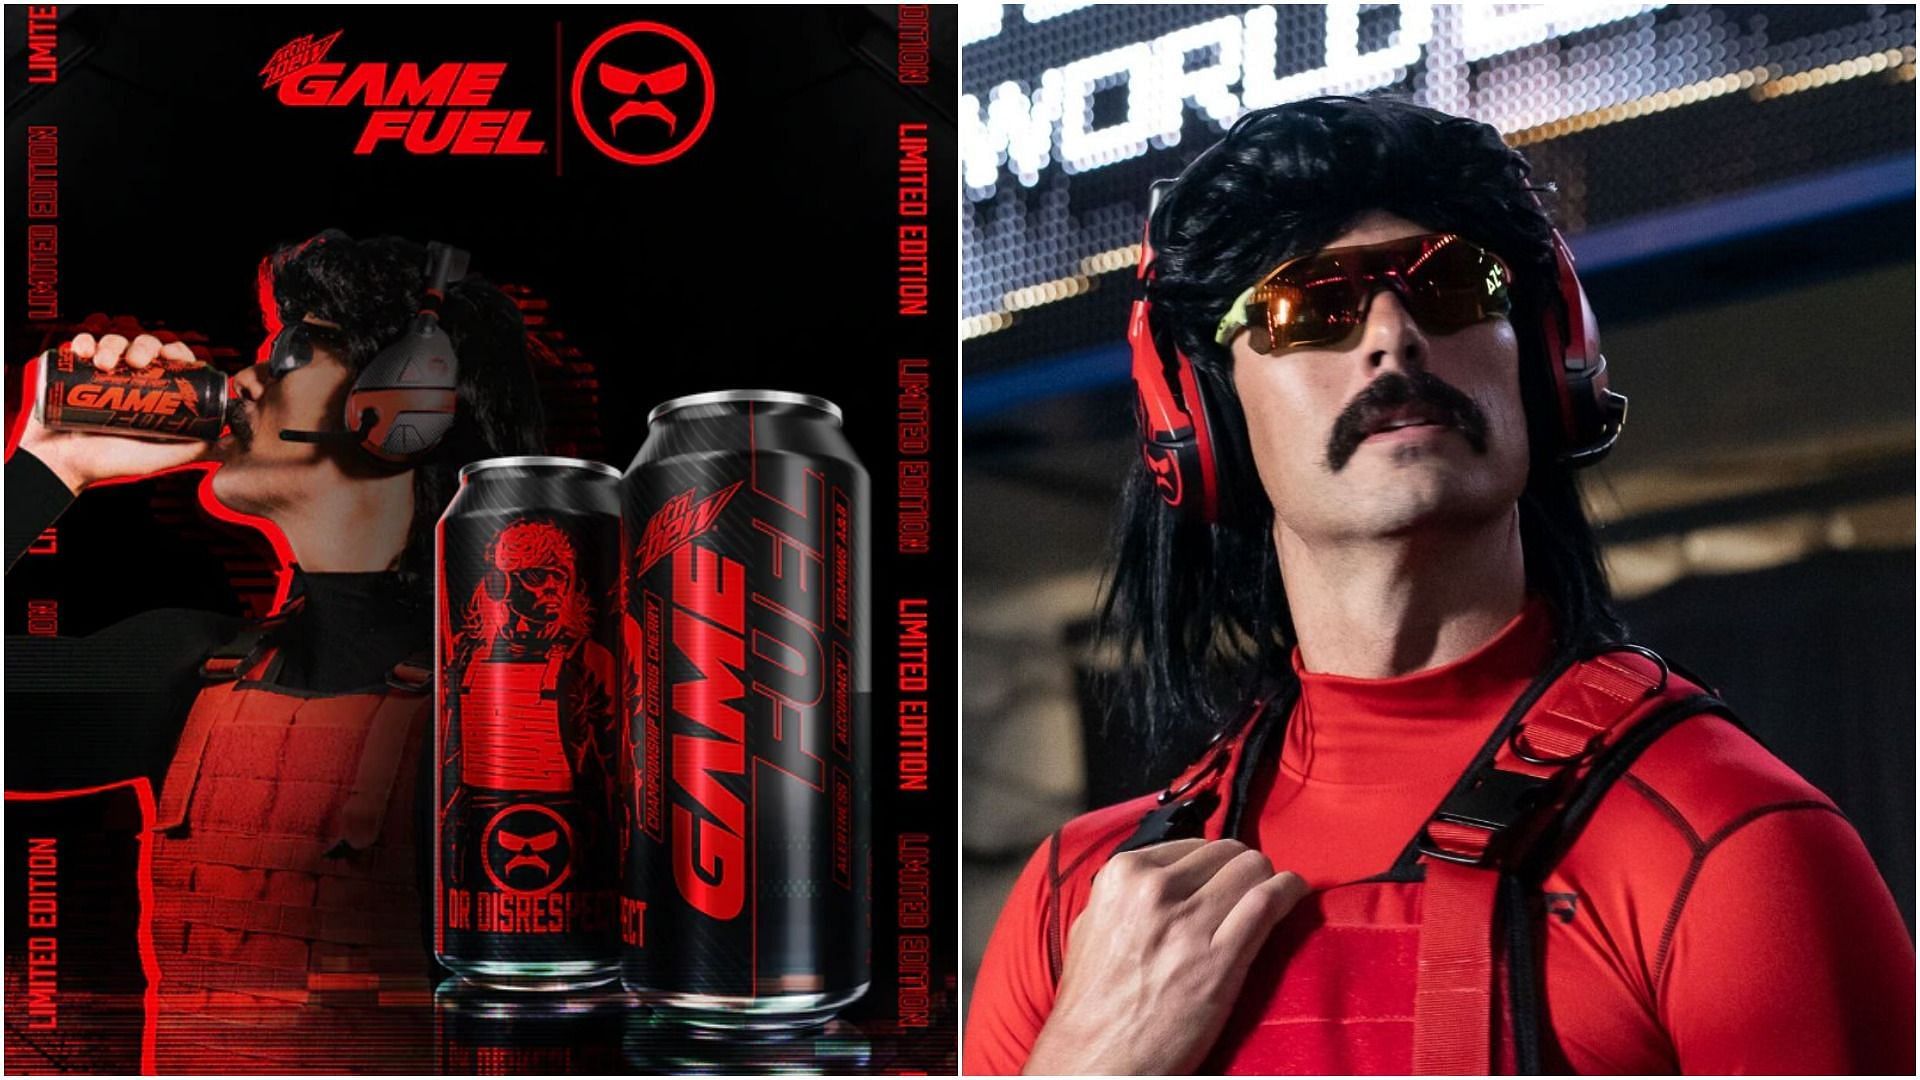 Dr Disrespect and Game Fuel announce new limited-edition flavor and can design (Image via Sportskeeda)